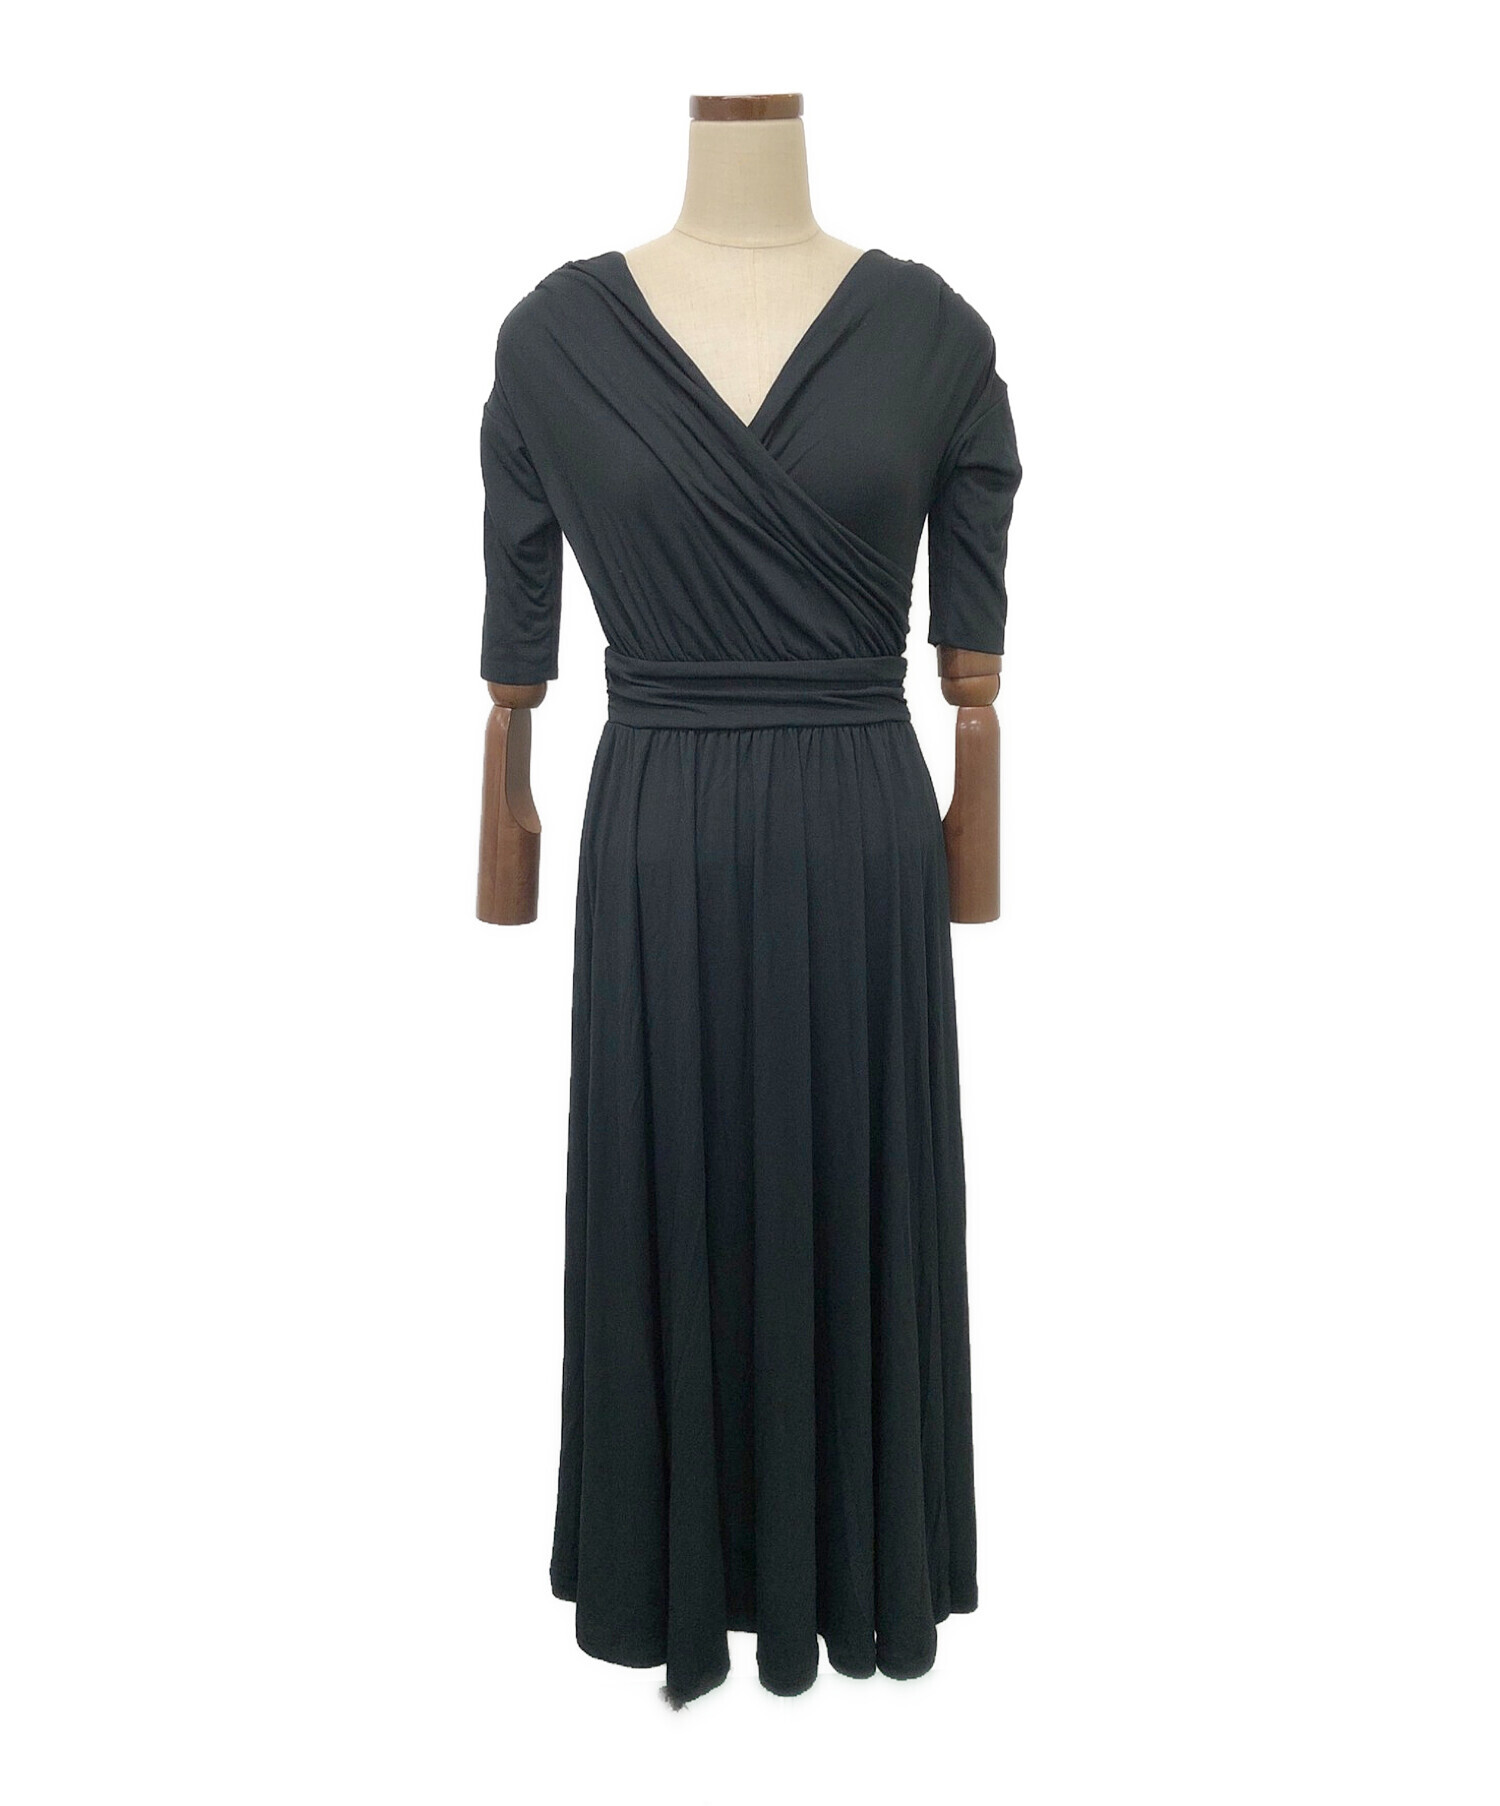 Her lip to Cache Coeur Jersey Long Dress